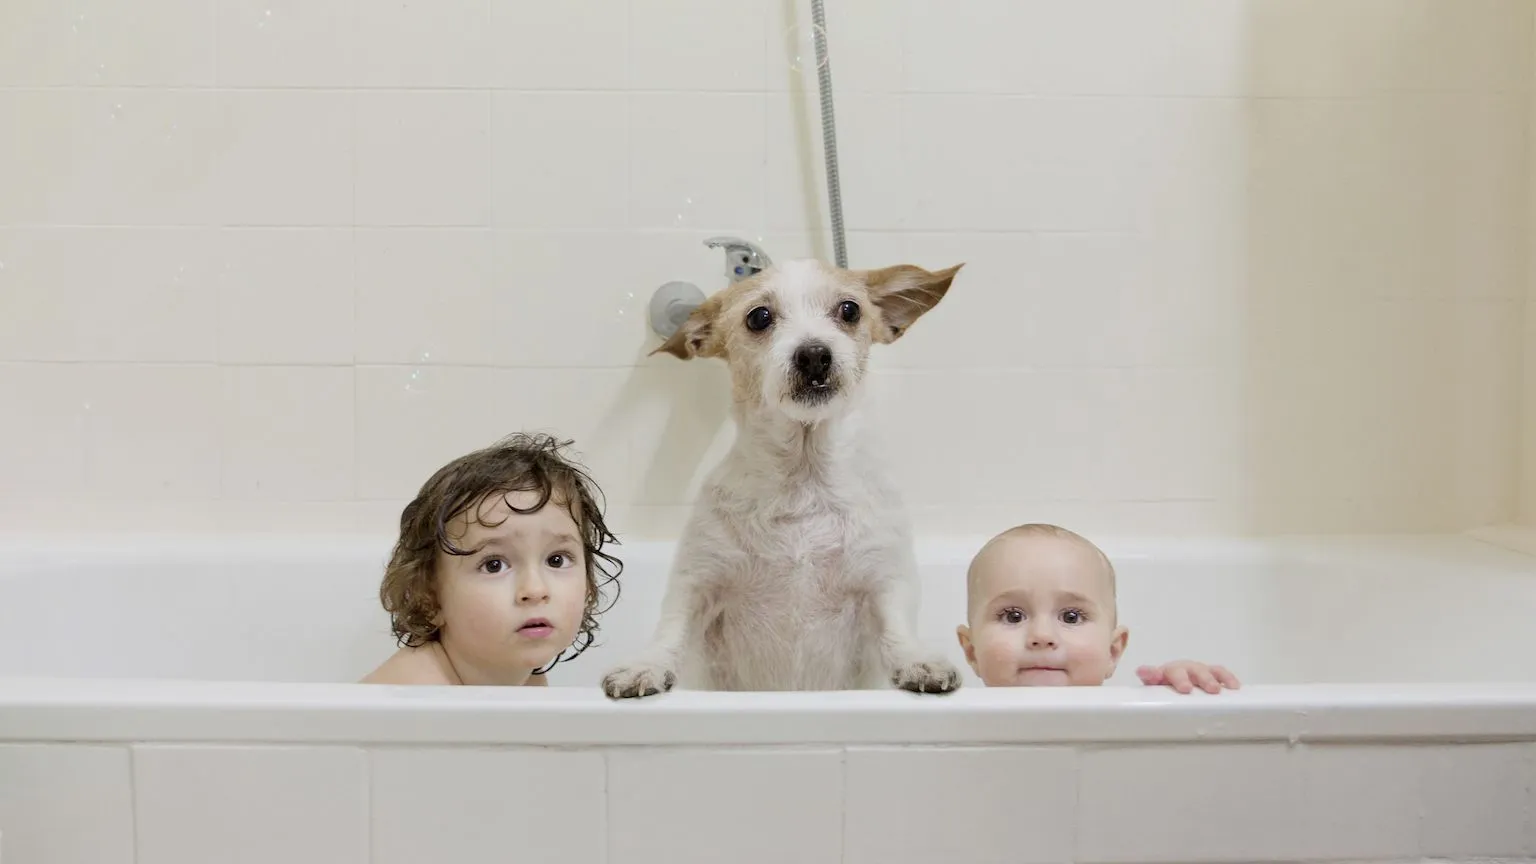 Two young kids and a dog poking their heads out of a bathtub